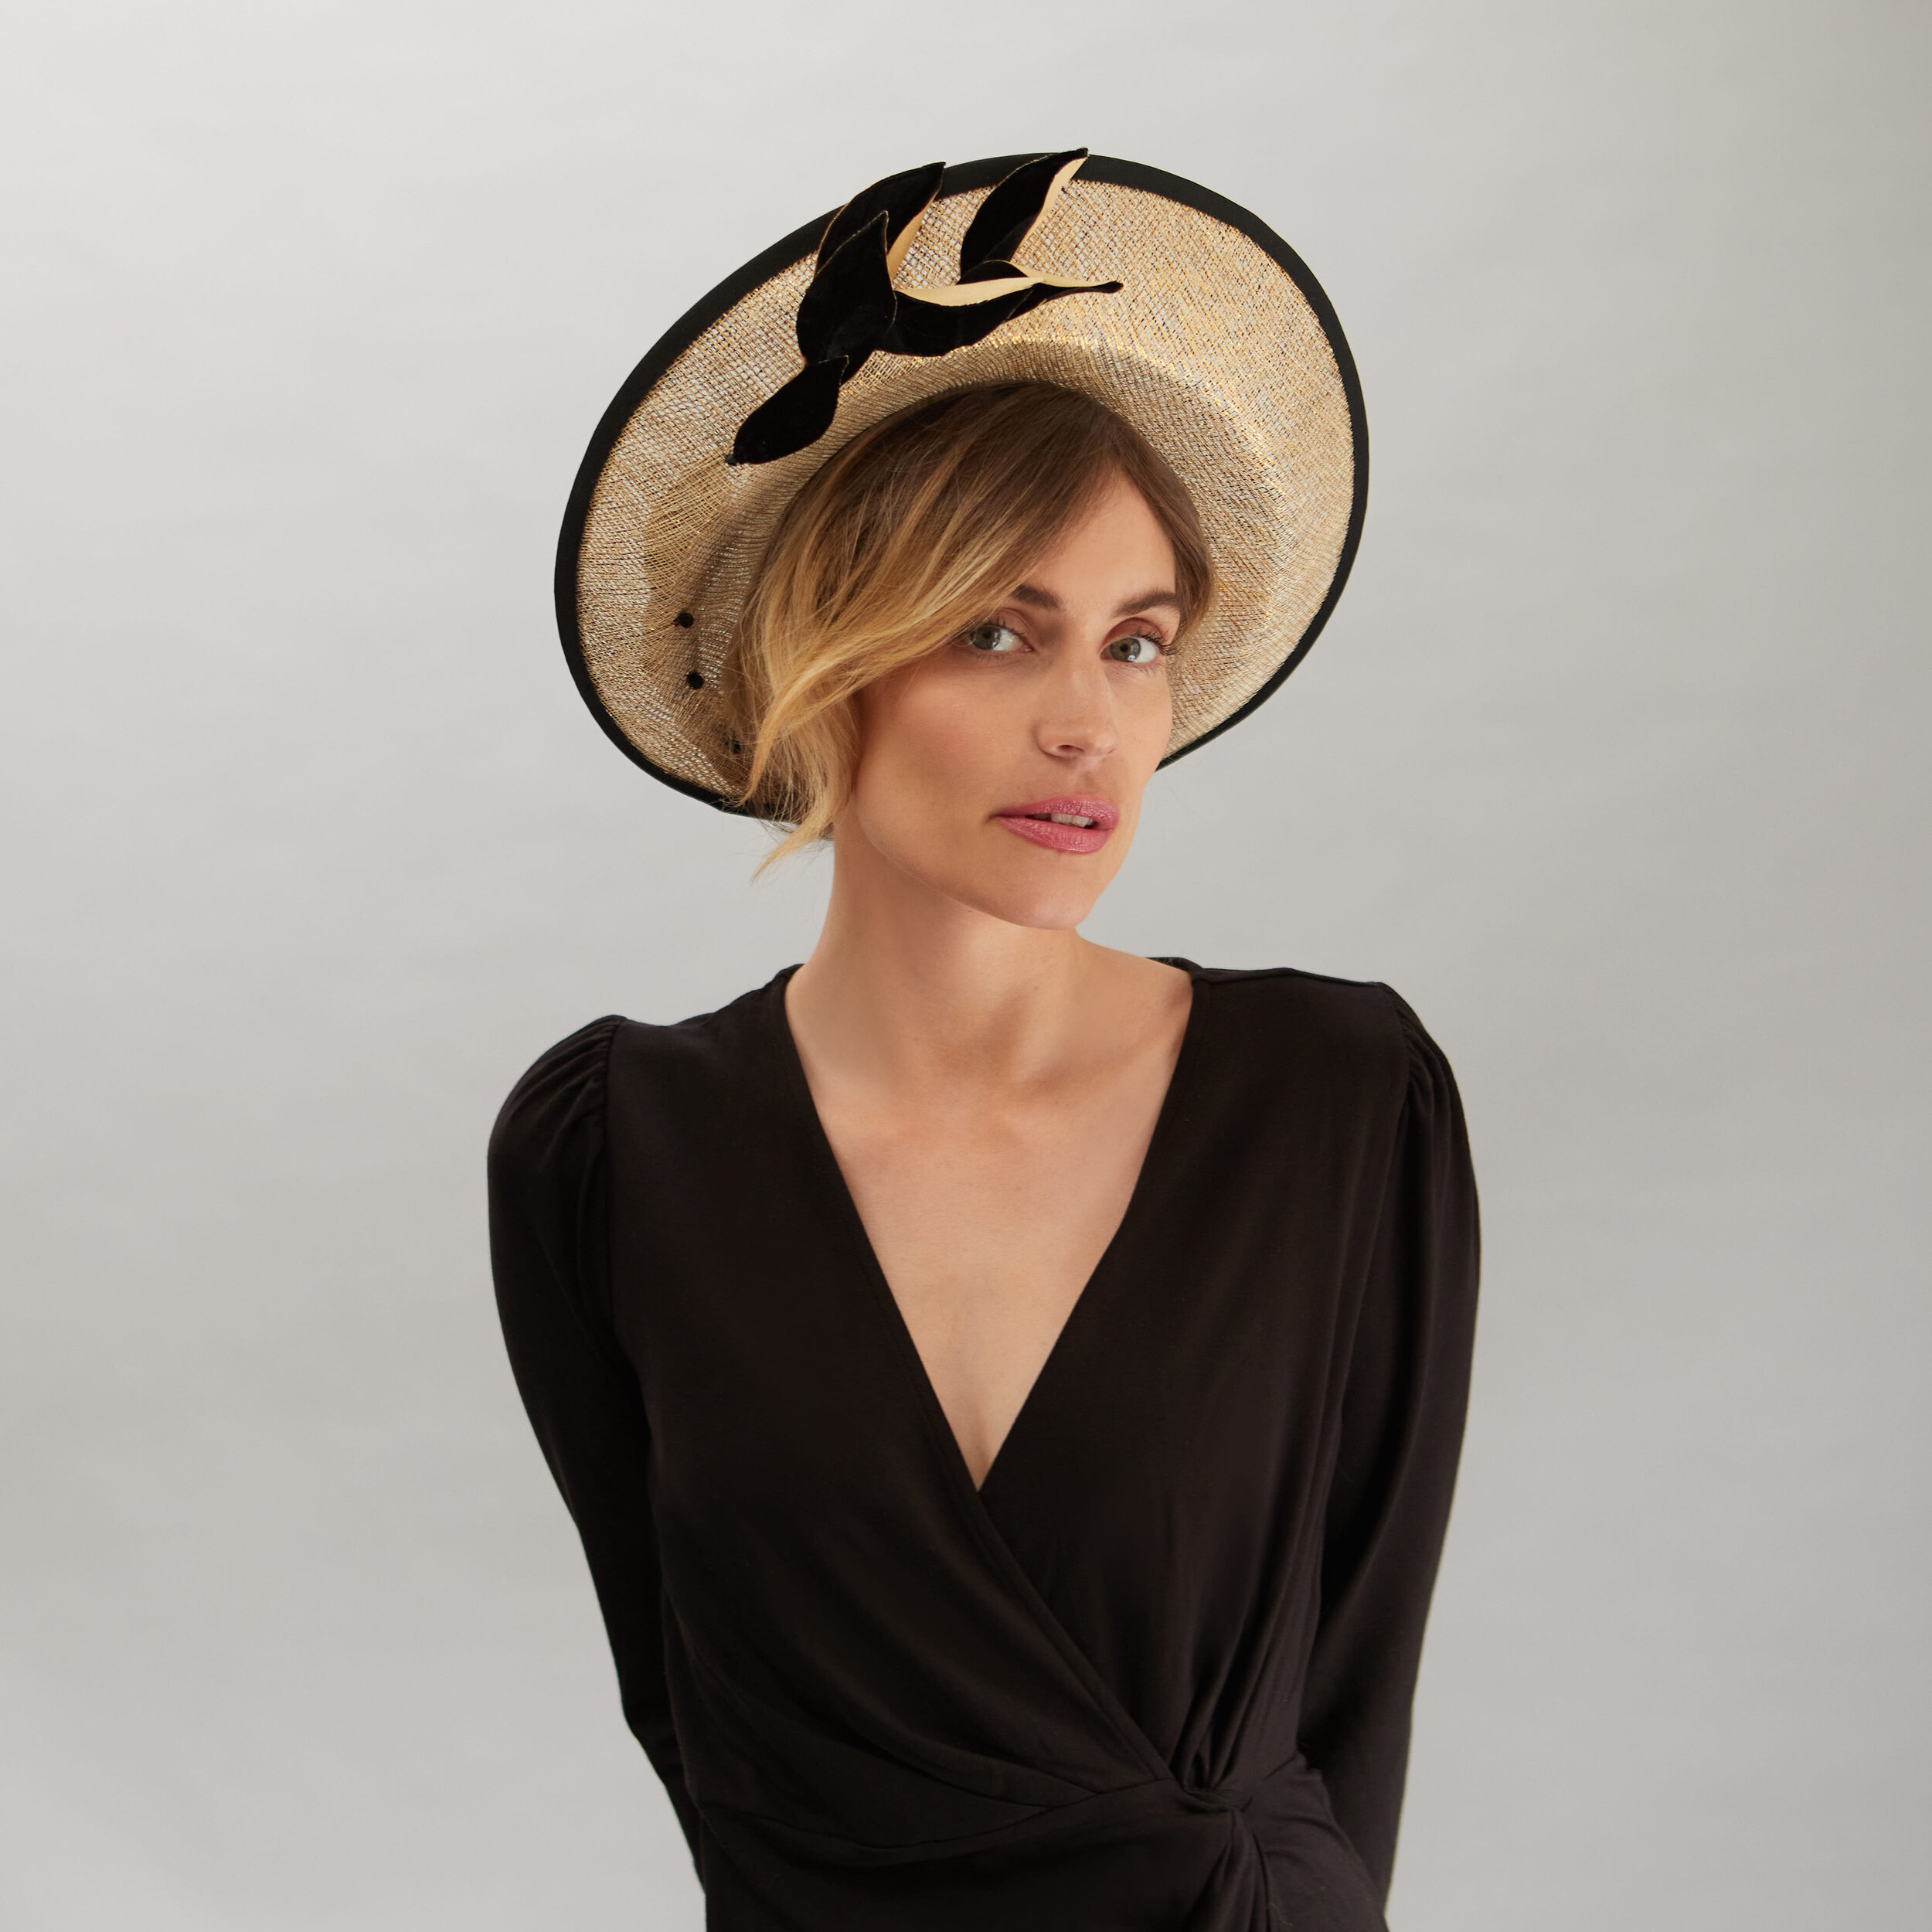 Marilyn-Brimmed Hat Black and Gold-By Judy Bentinck-4.jpg